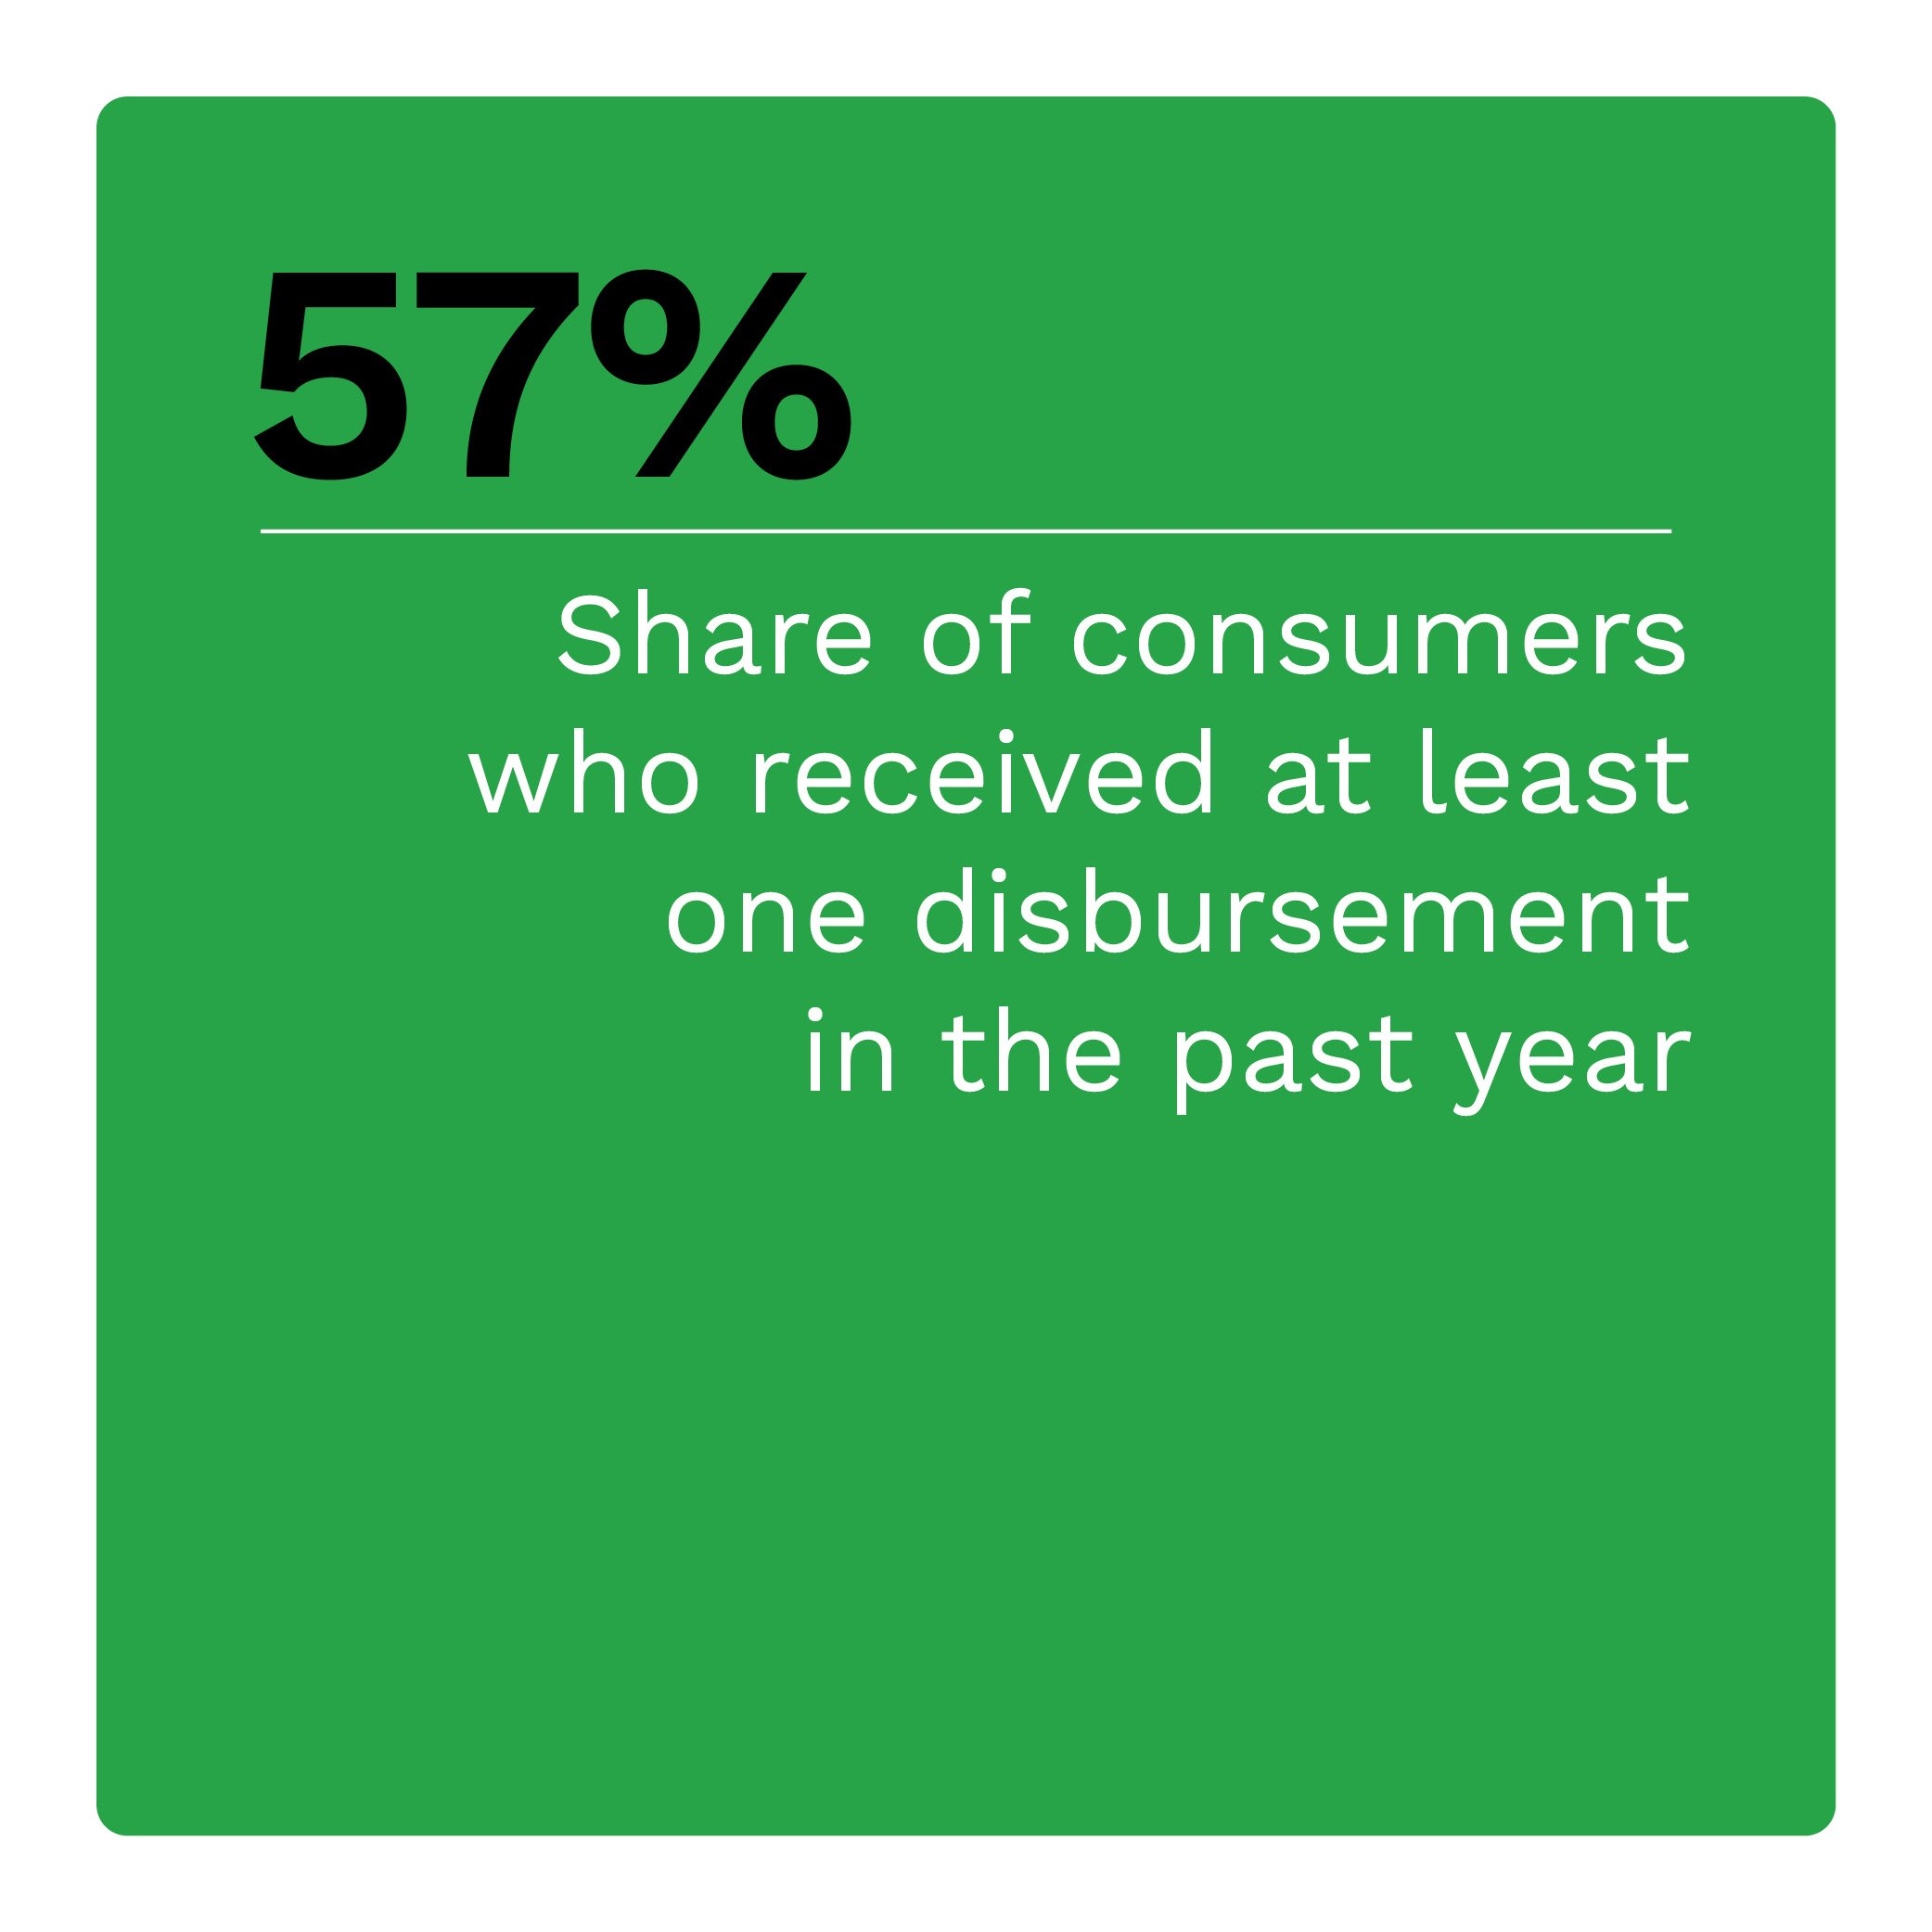 57%: Share of consumers who received at least one disbursement in the past year